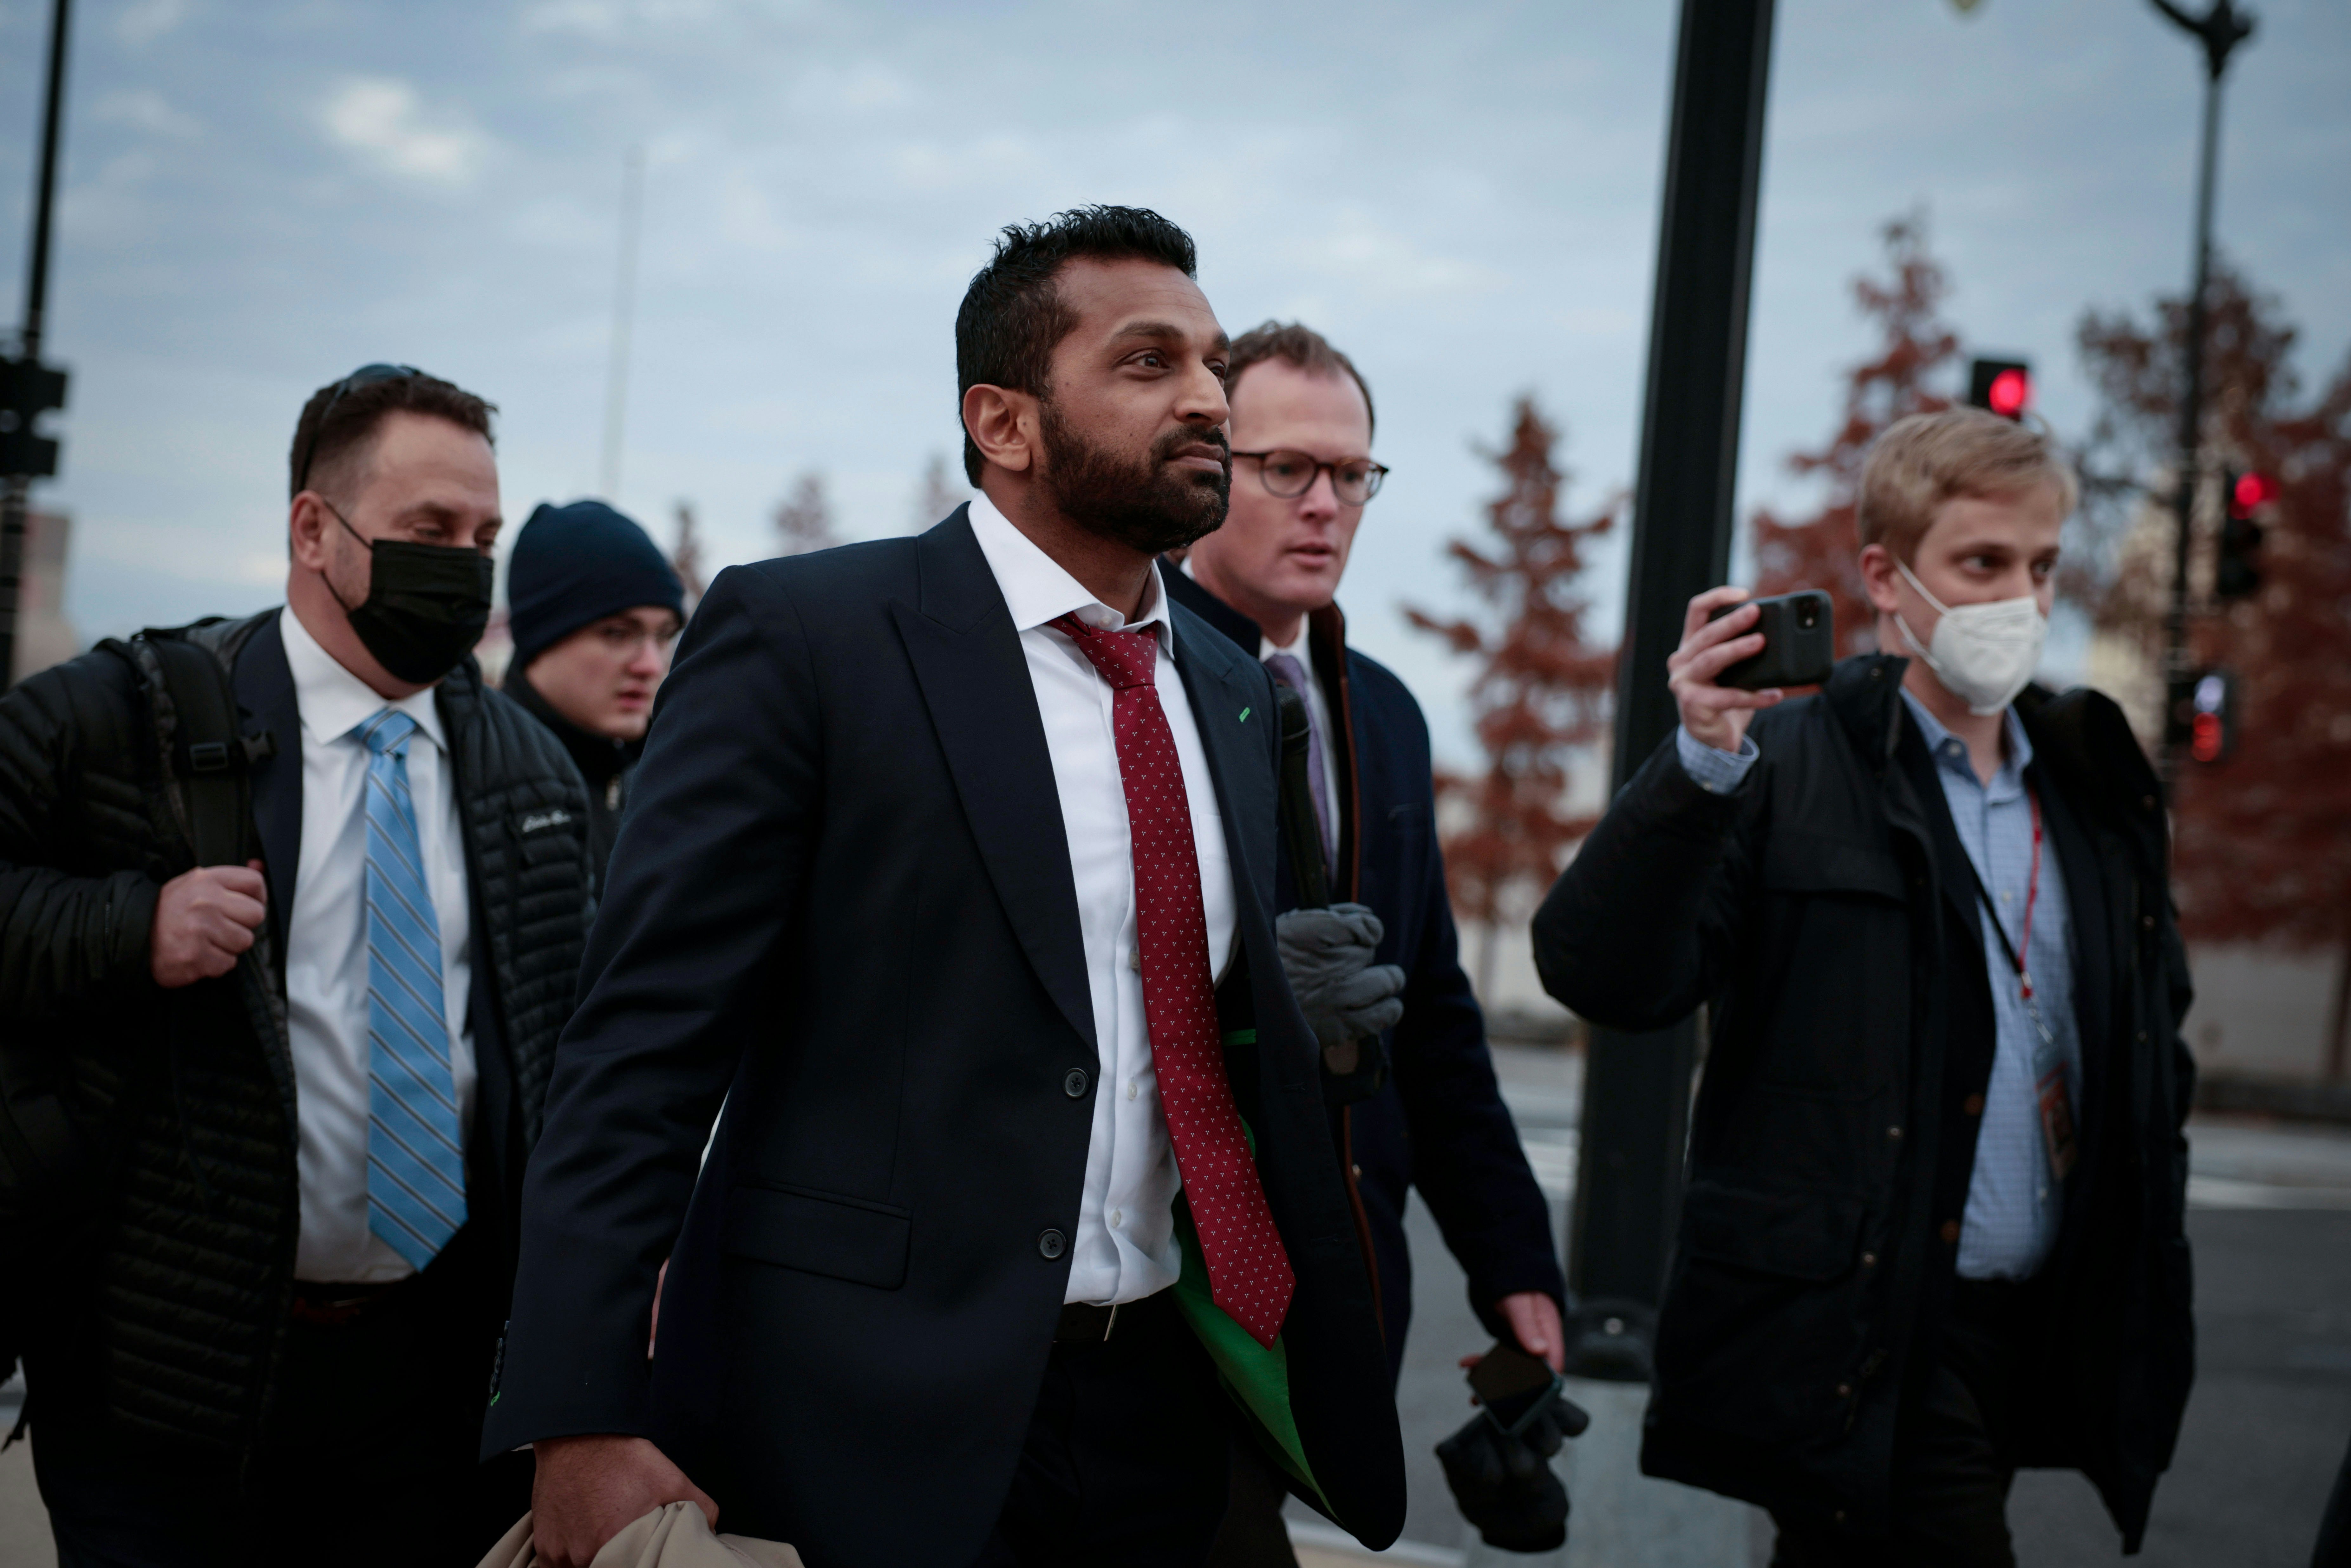 WASHINGTON, DC - DECEMBER 09: Kash Patel, a former chief of staff to then-acting Secretary of Defense Christopher Miller, is followed by reporters as he departs from a deposition meeting on Capitol Hill with the House select committee investigating the January 6th attack, on December 09, 2021 in Washington, DC. Members of the committee and staff members have been meeting with Patel and Stop the Steal organizer Ali Alexander, who both say they are cooperating with the committee investigation. (Photo by Anna Moneymaker/Getty Images)